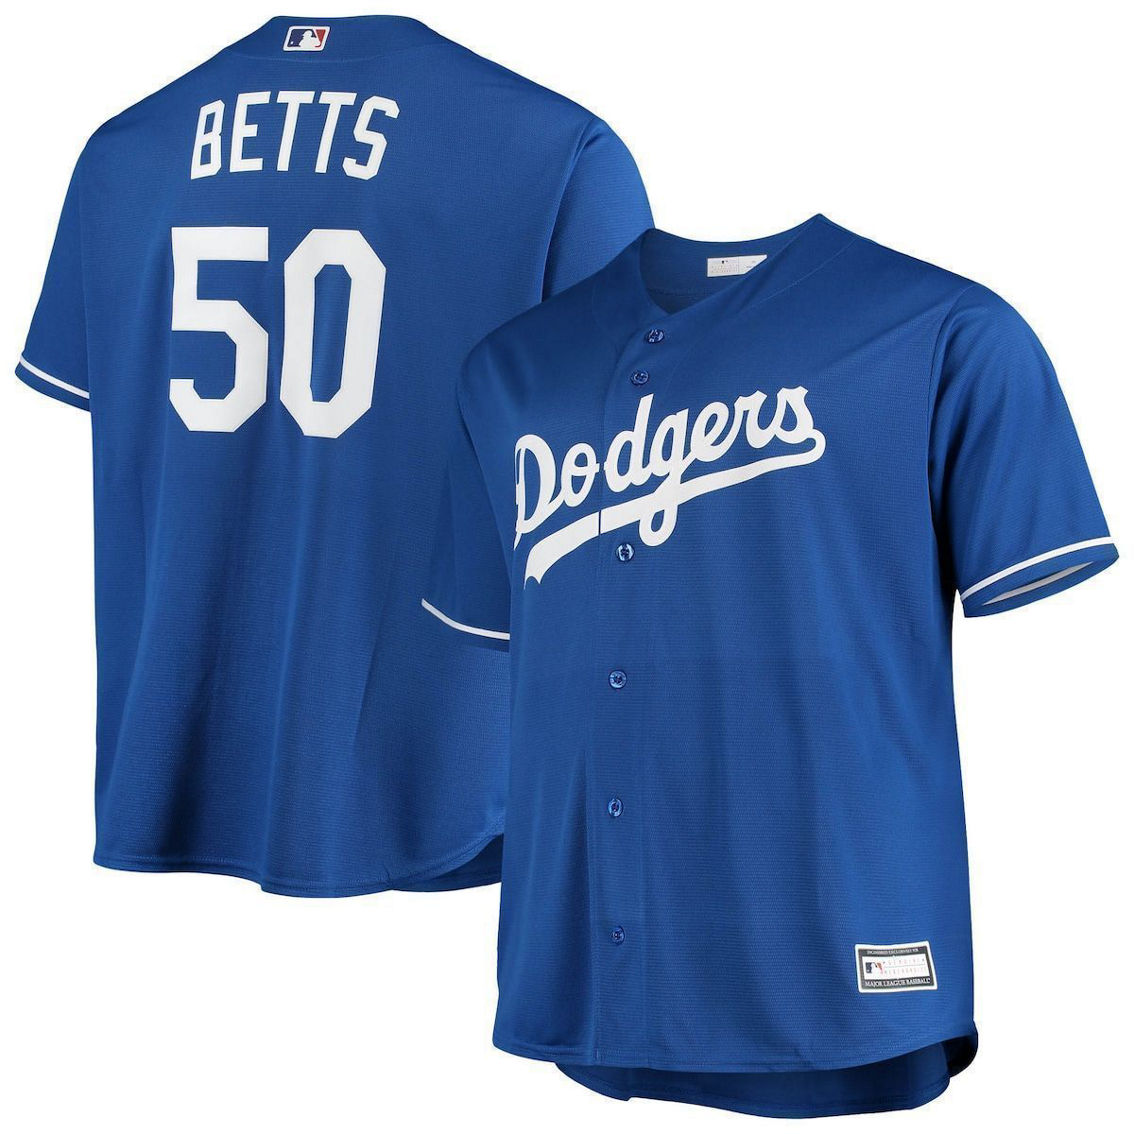 Majestic Men's Mookie Betts Royal Los Angeles Dodgers Big & Tall Replica Player Jersey